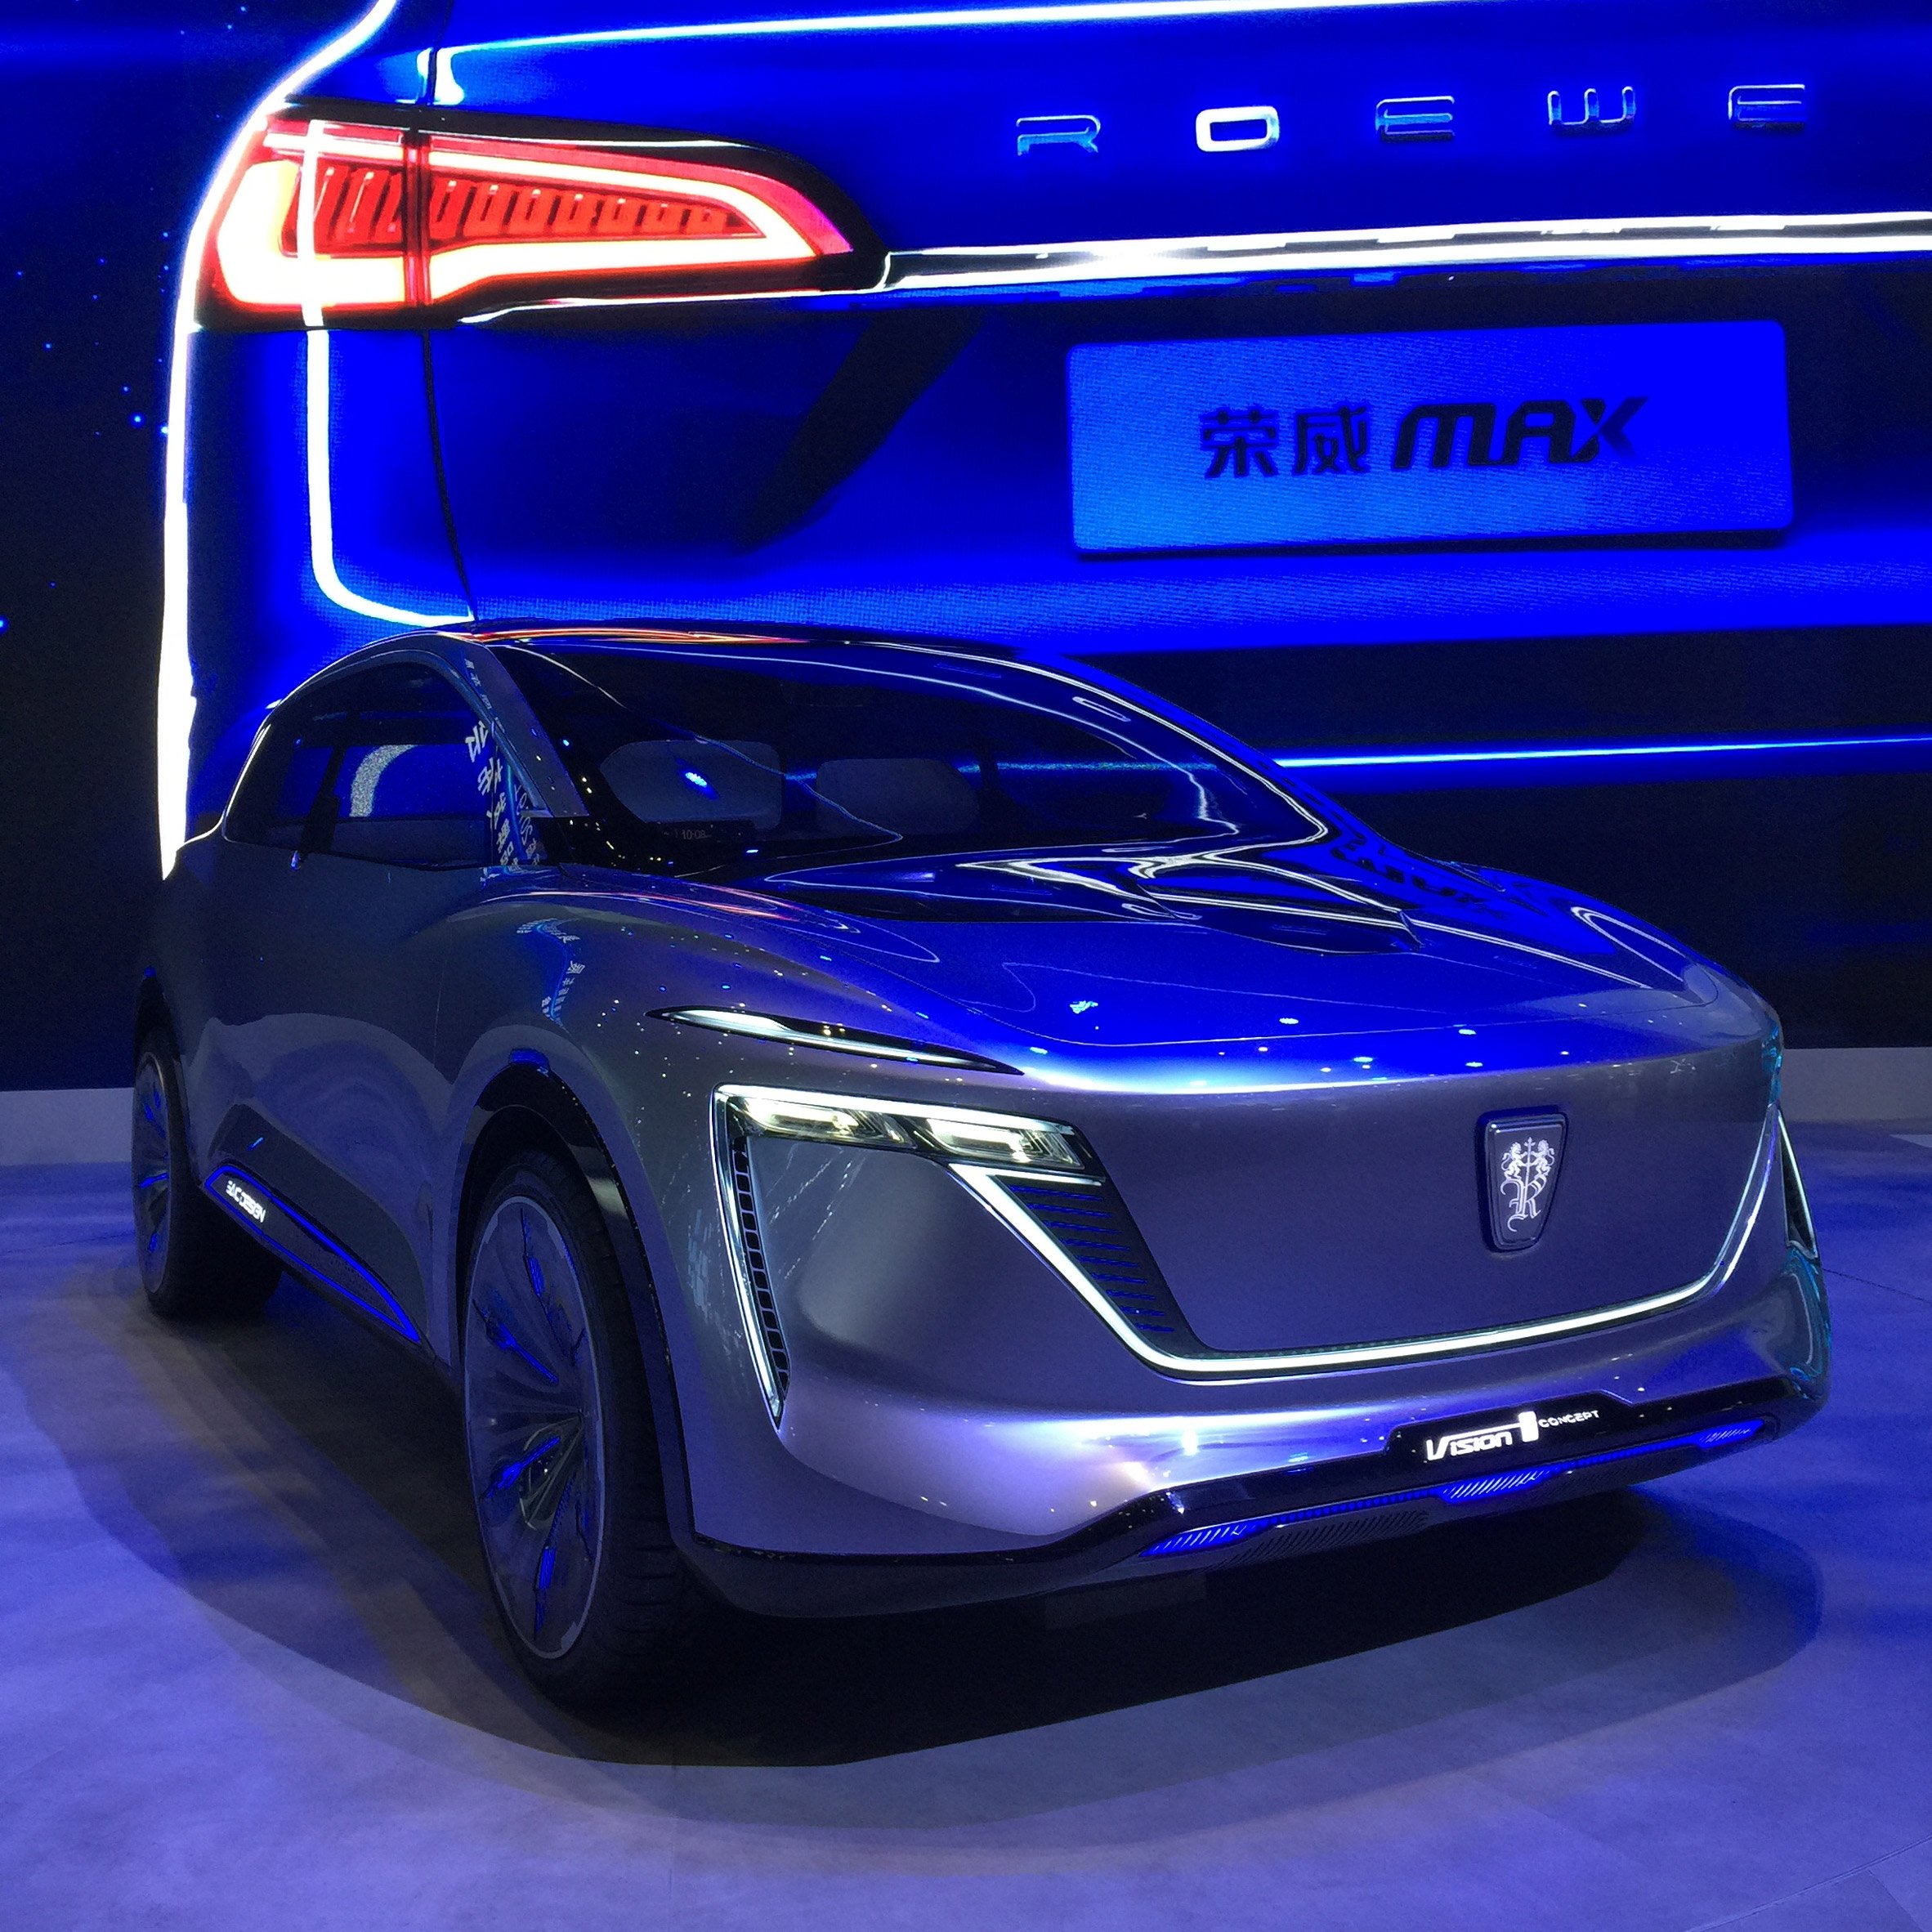 10 electric cars by Chinese car companies at Auto Shanghai 2019: Vision I concept by SAIC